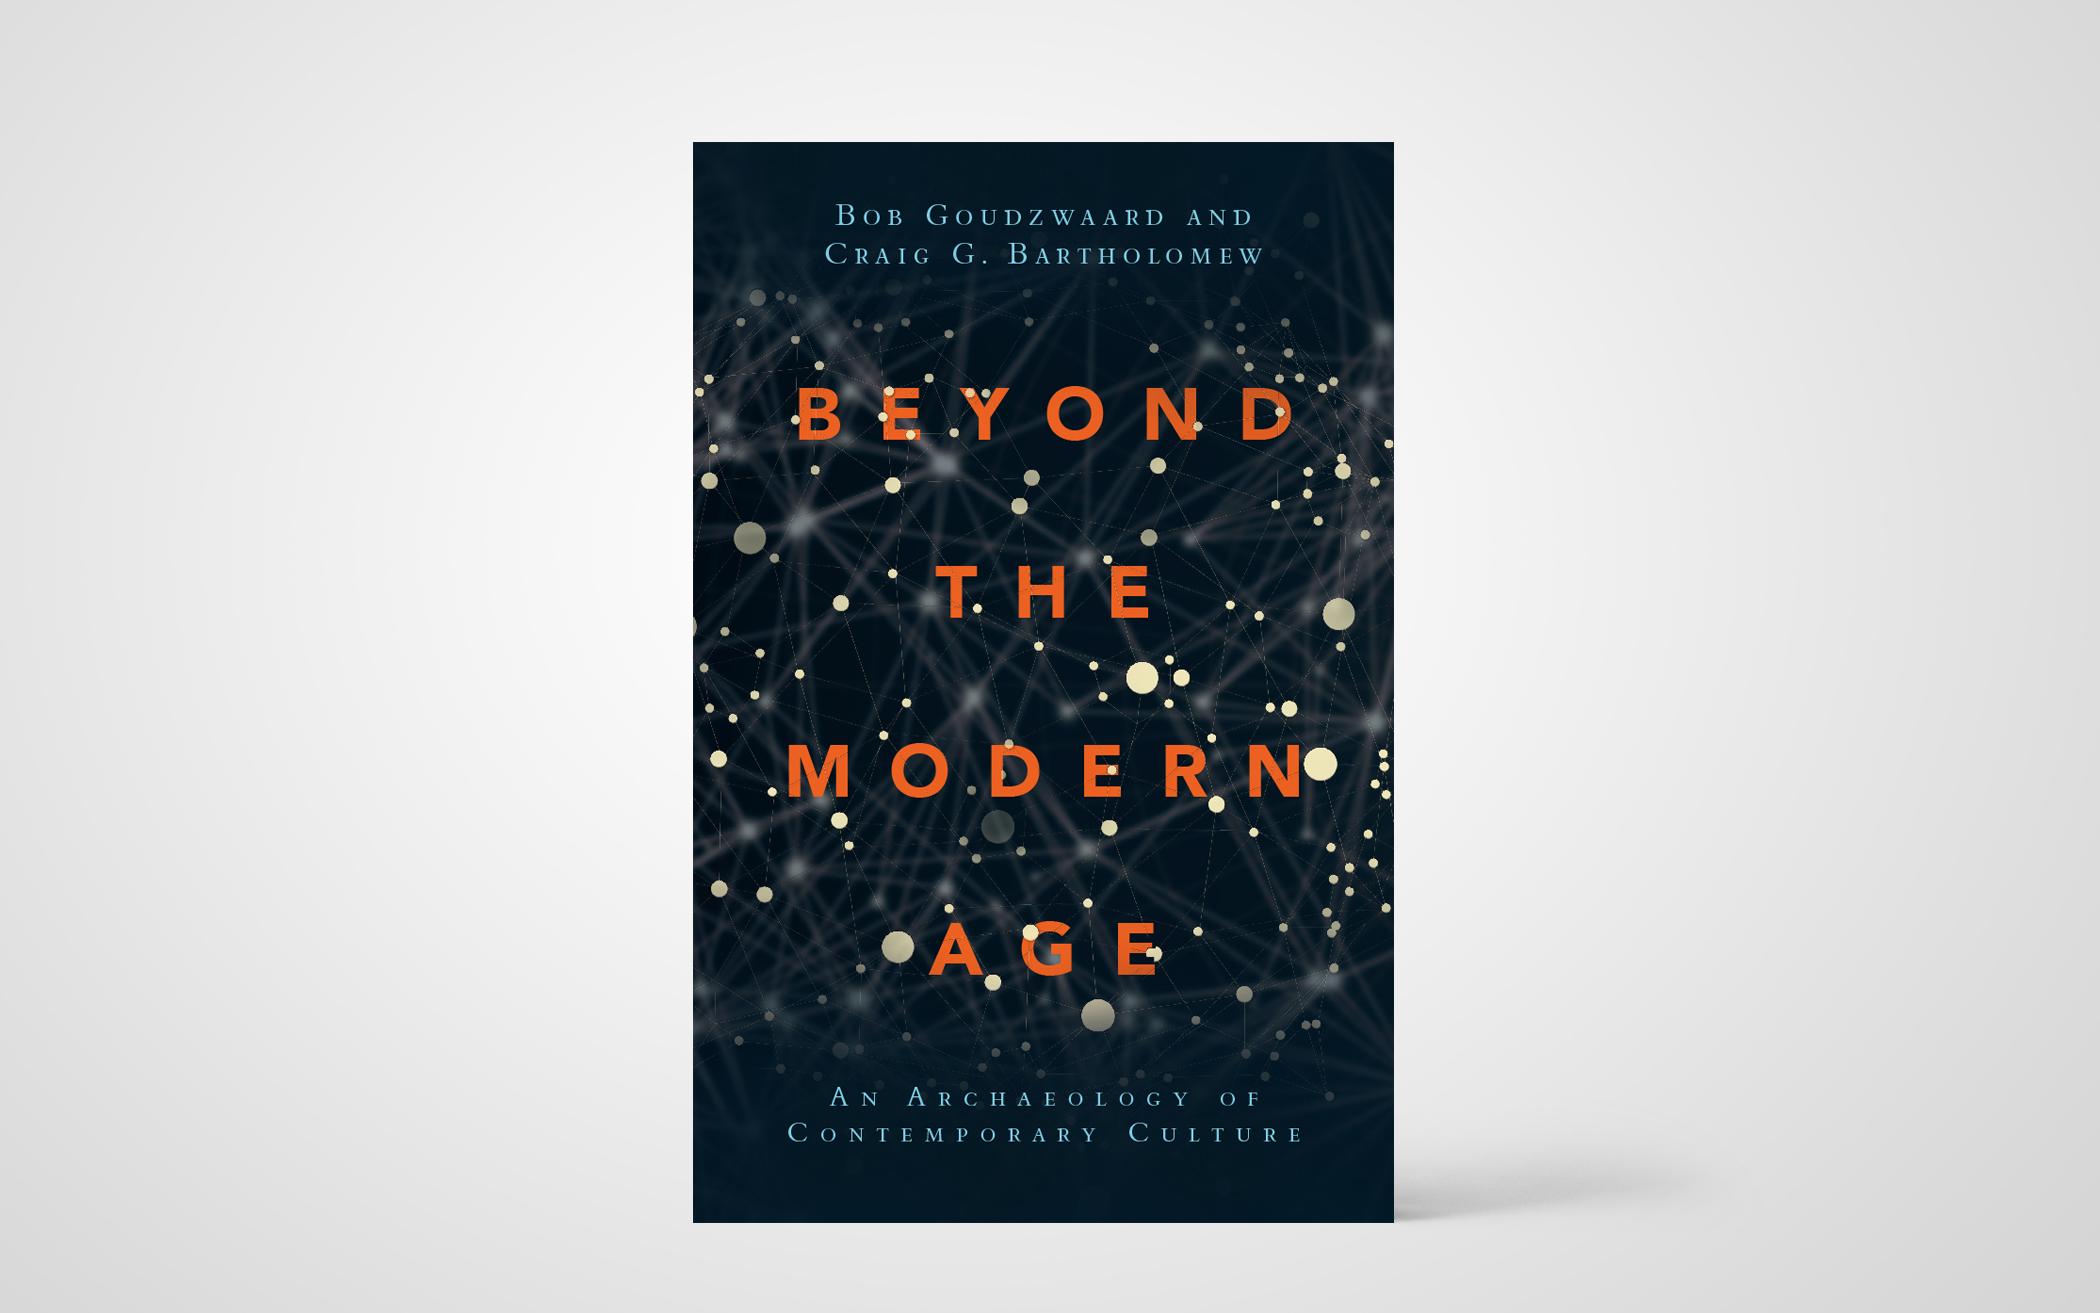 Beyond the Modern Age: An Archaeology of Contemporary Culture